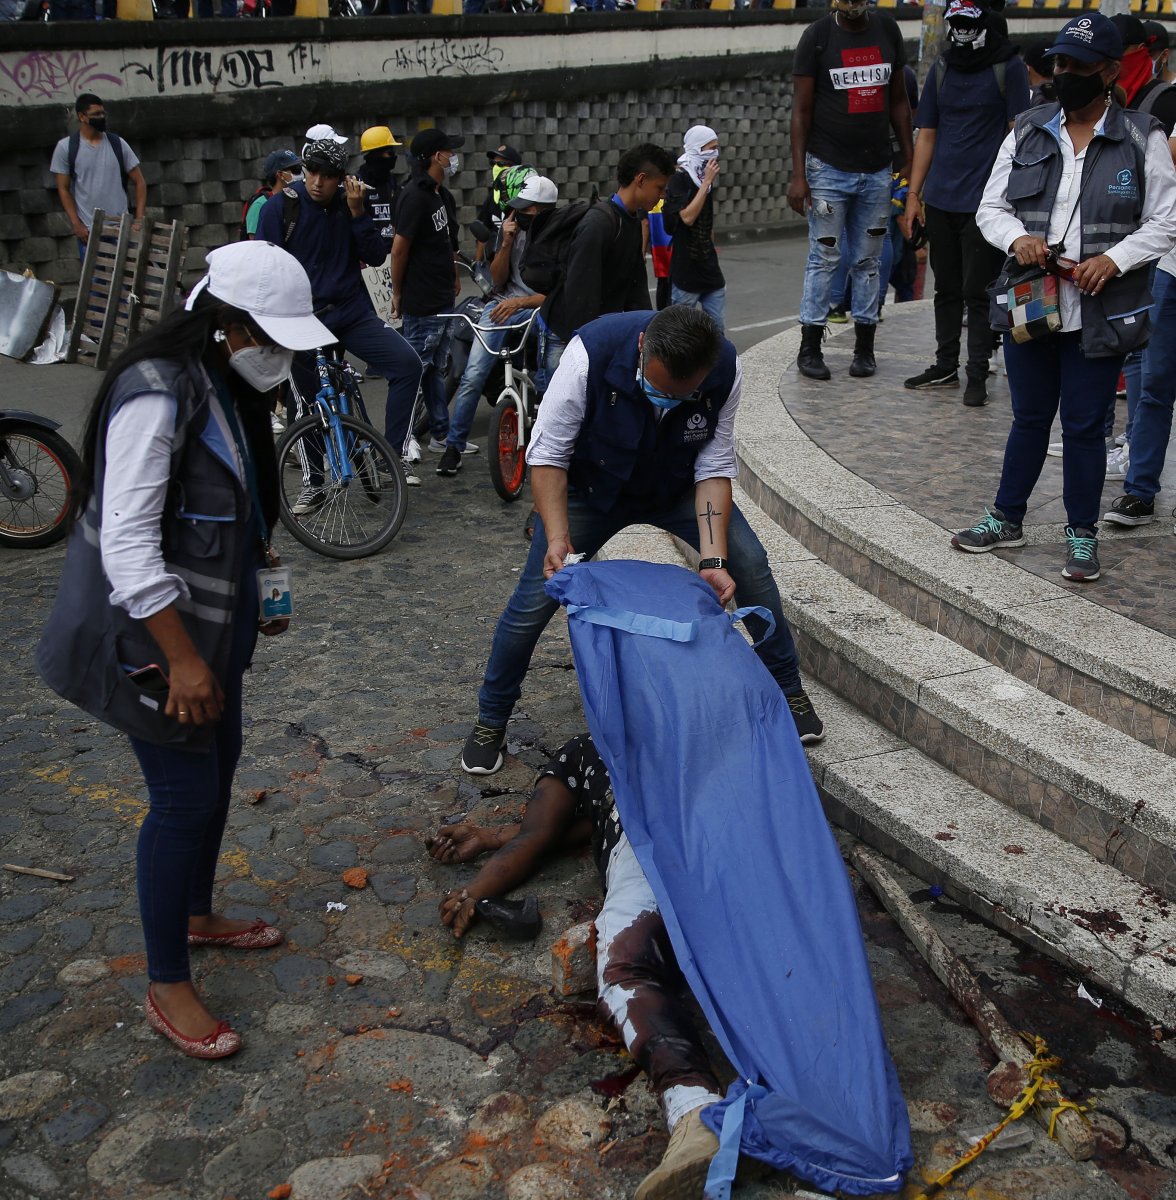 4 people died in protests in Colombia #7